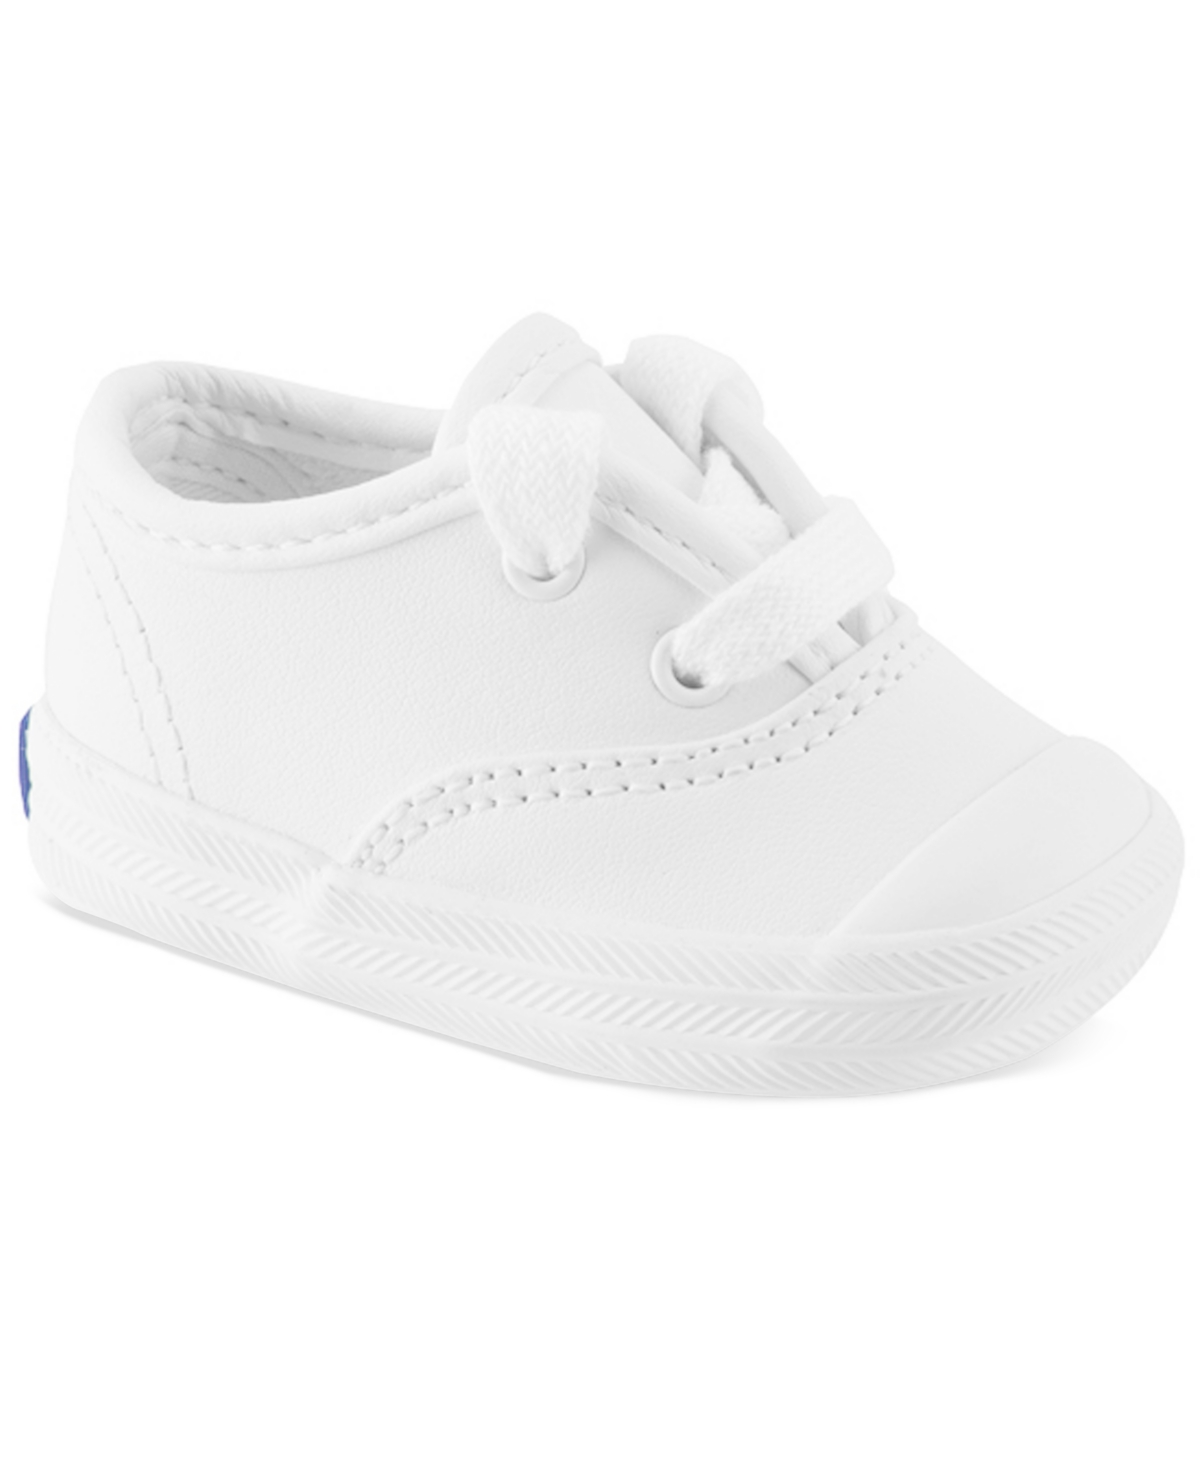 UPC 044213619796 product image for Keds Champion Sneakers, Baby Girls | upcitemdb.com